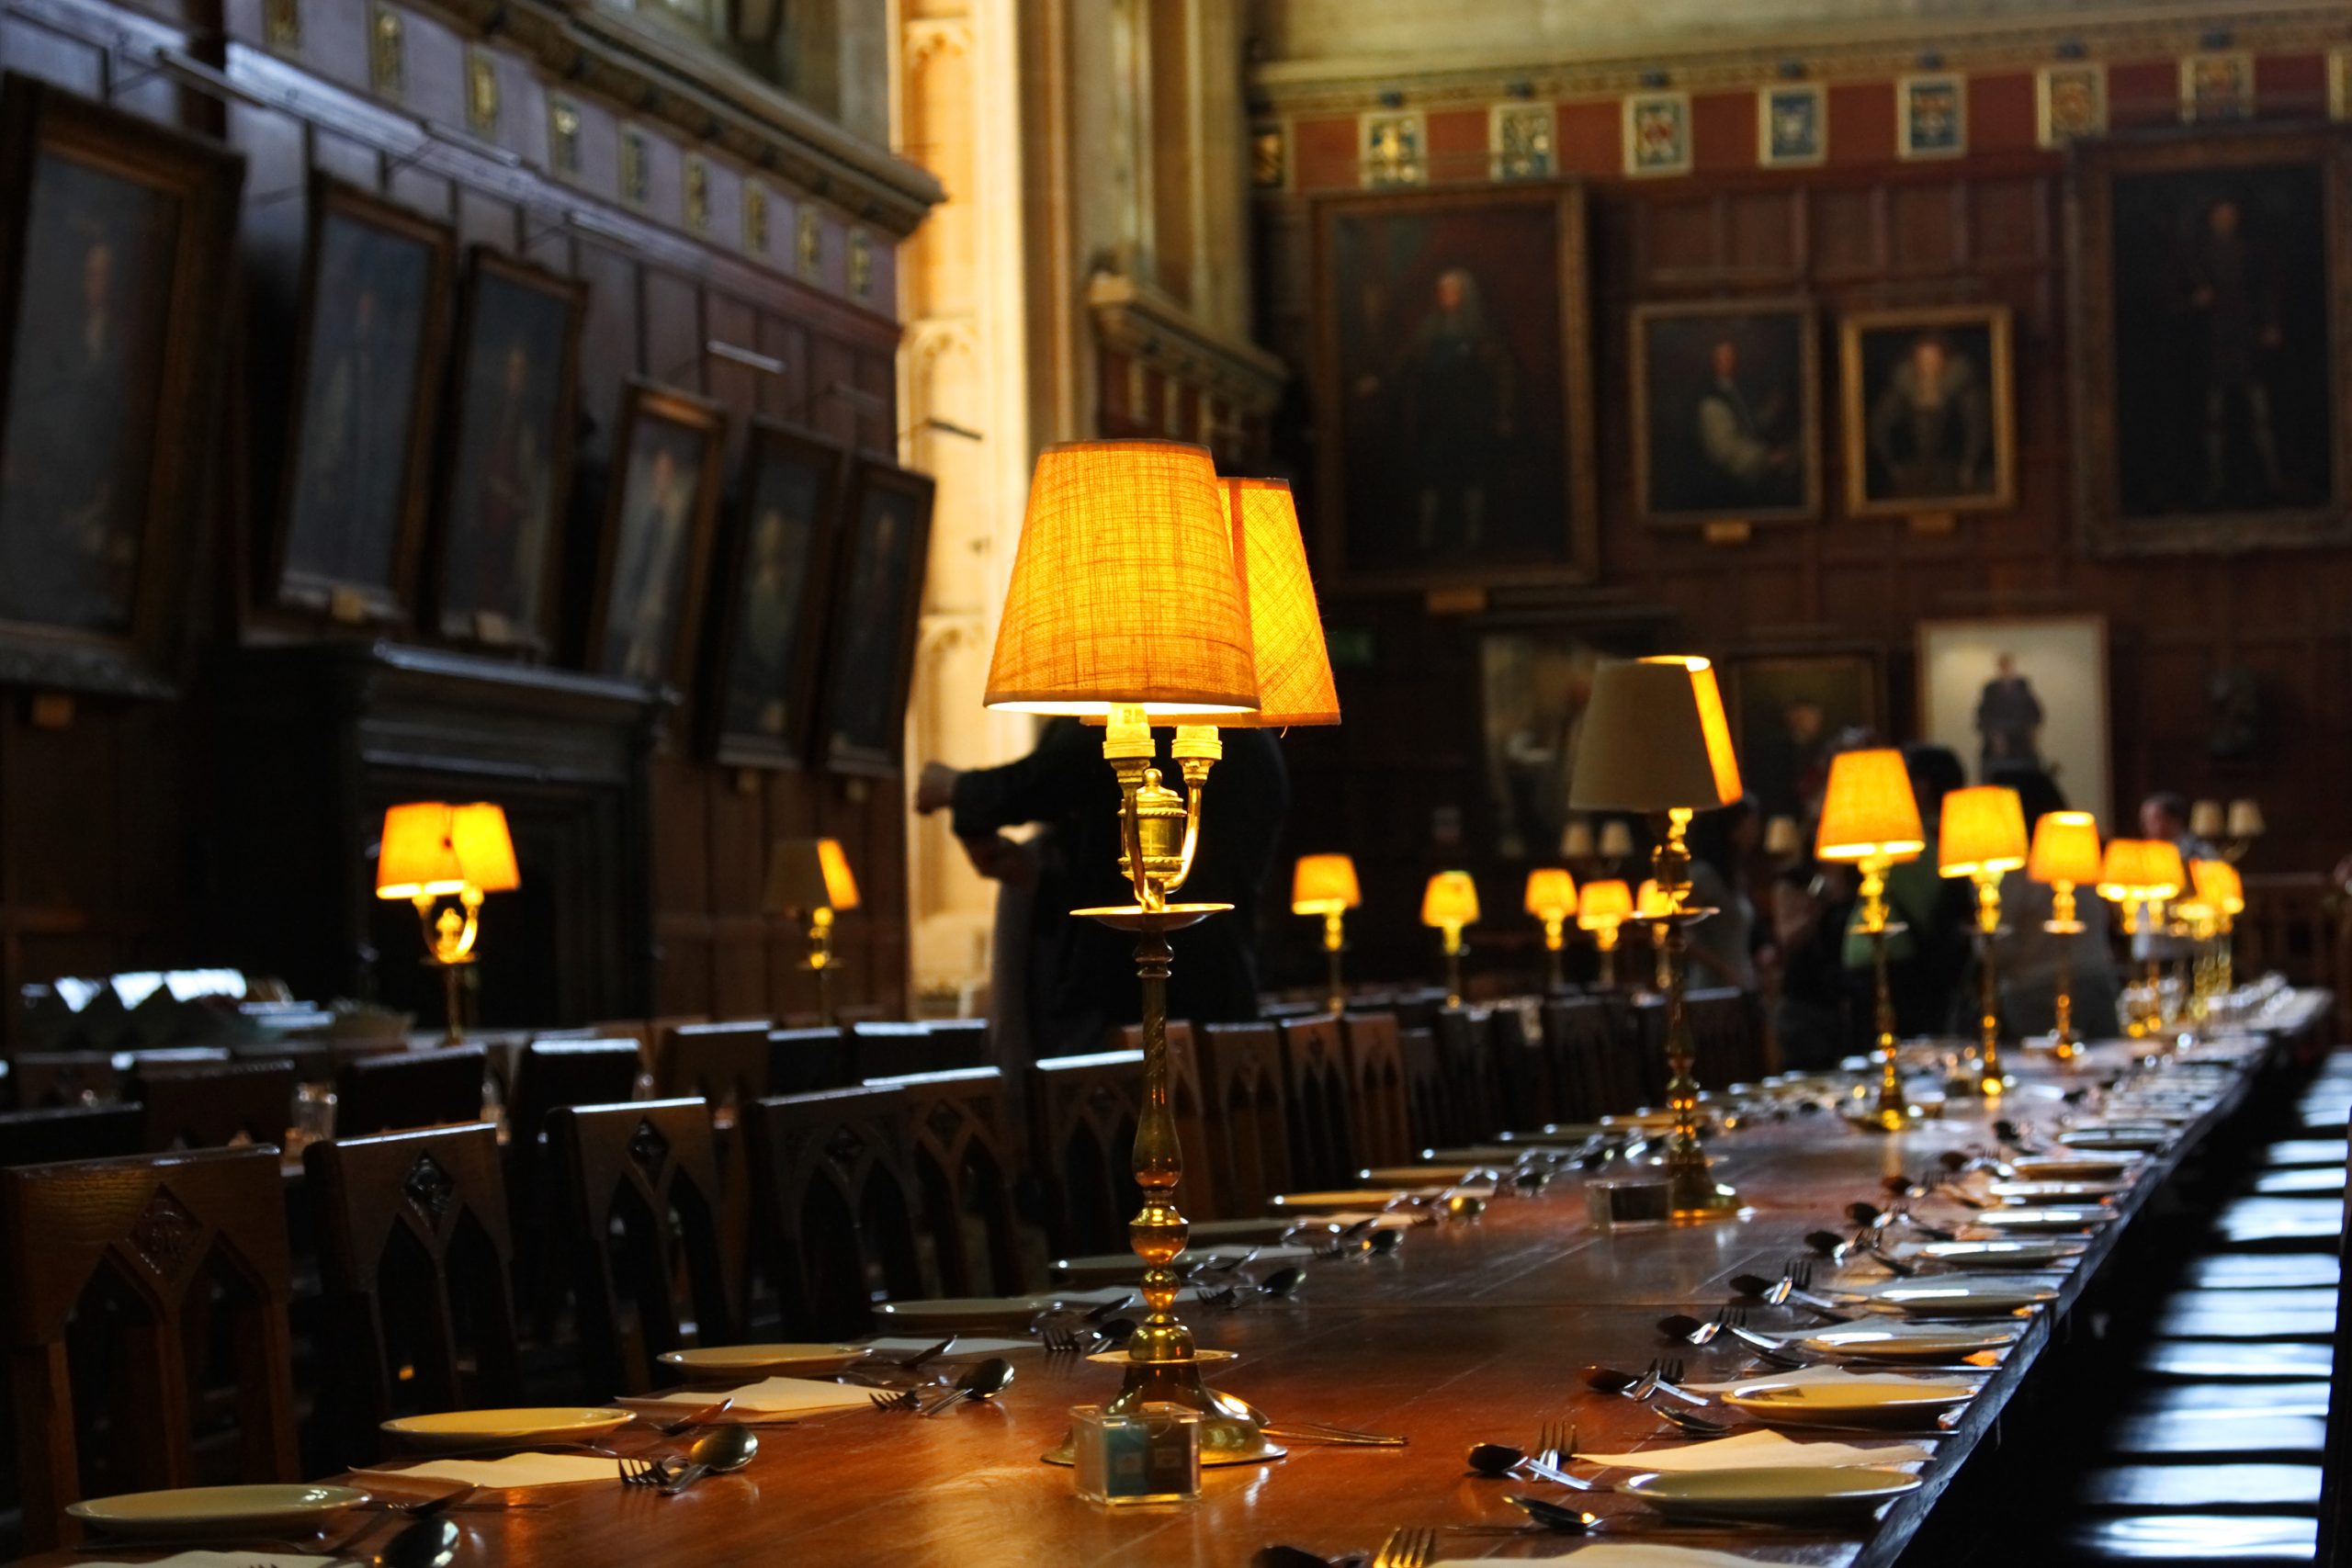 Christ Church dining hall - Filming Locations Harry Potter